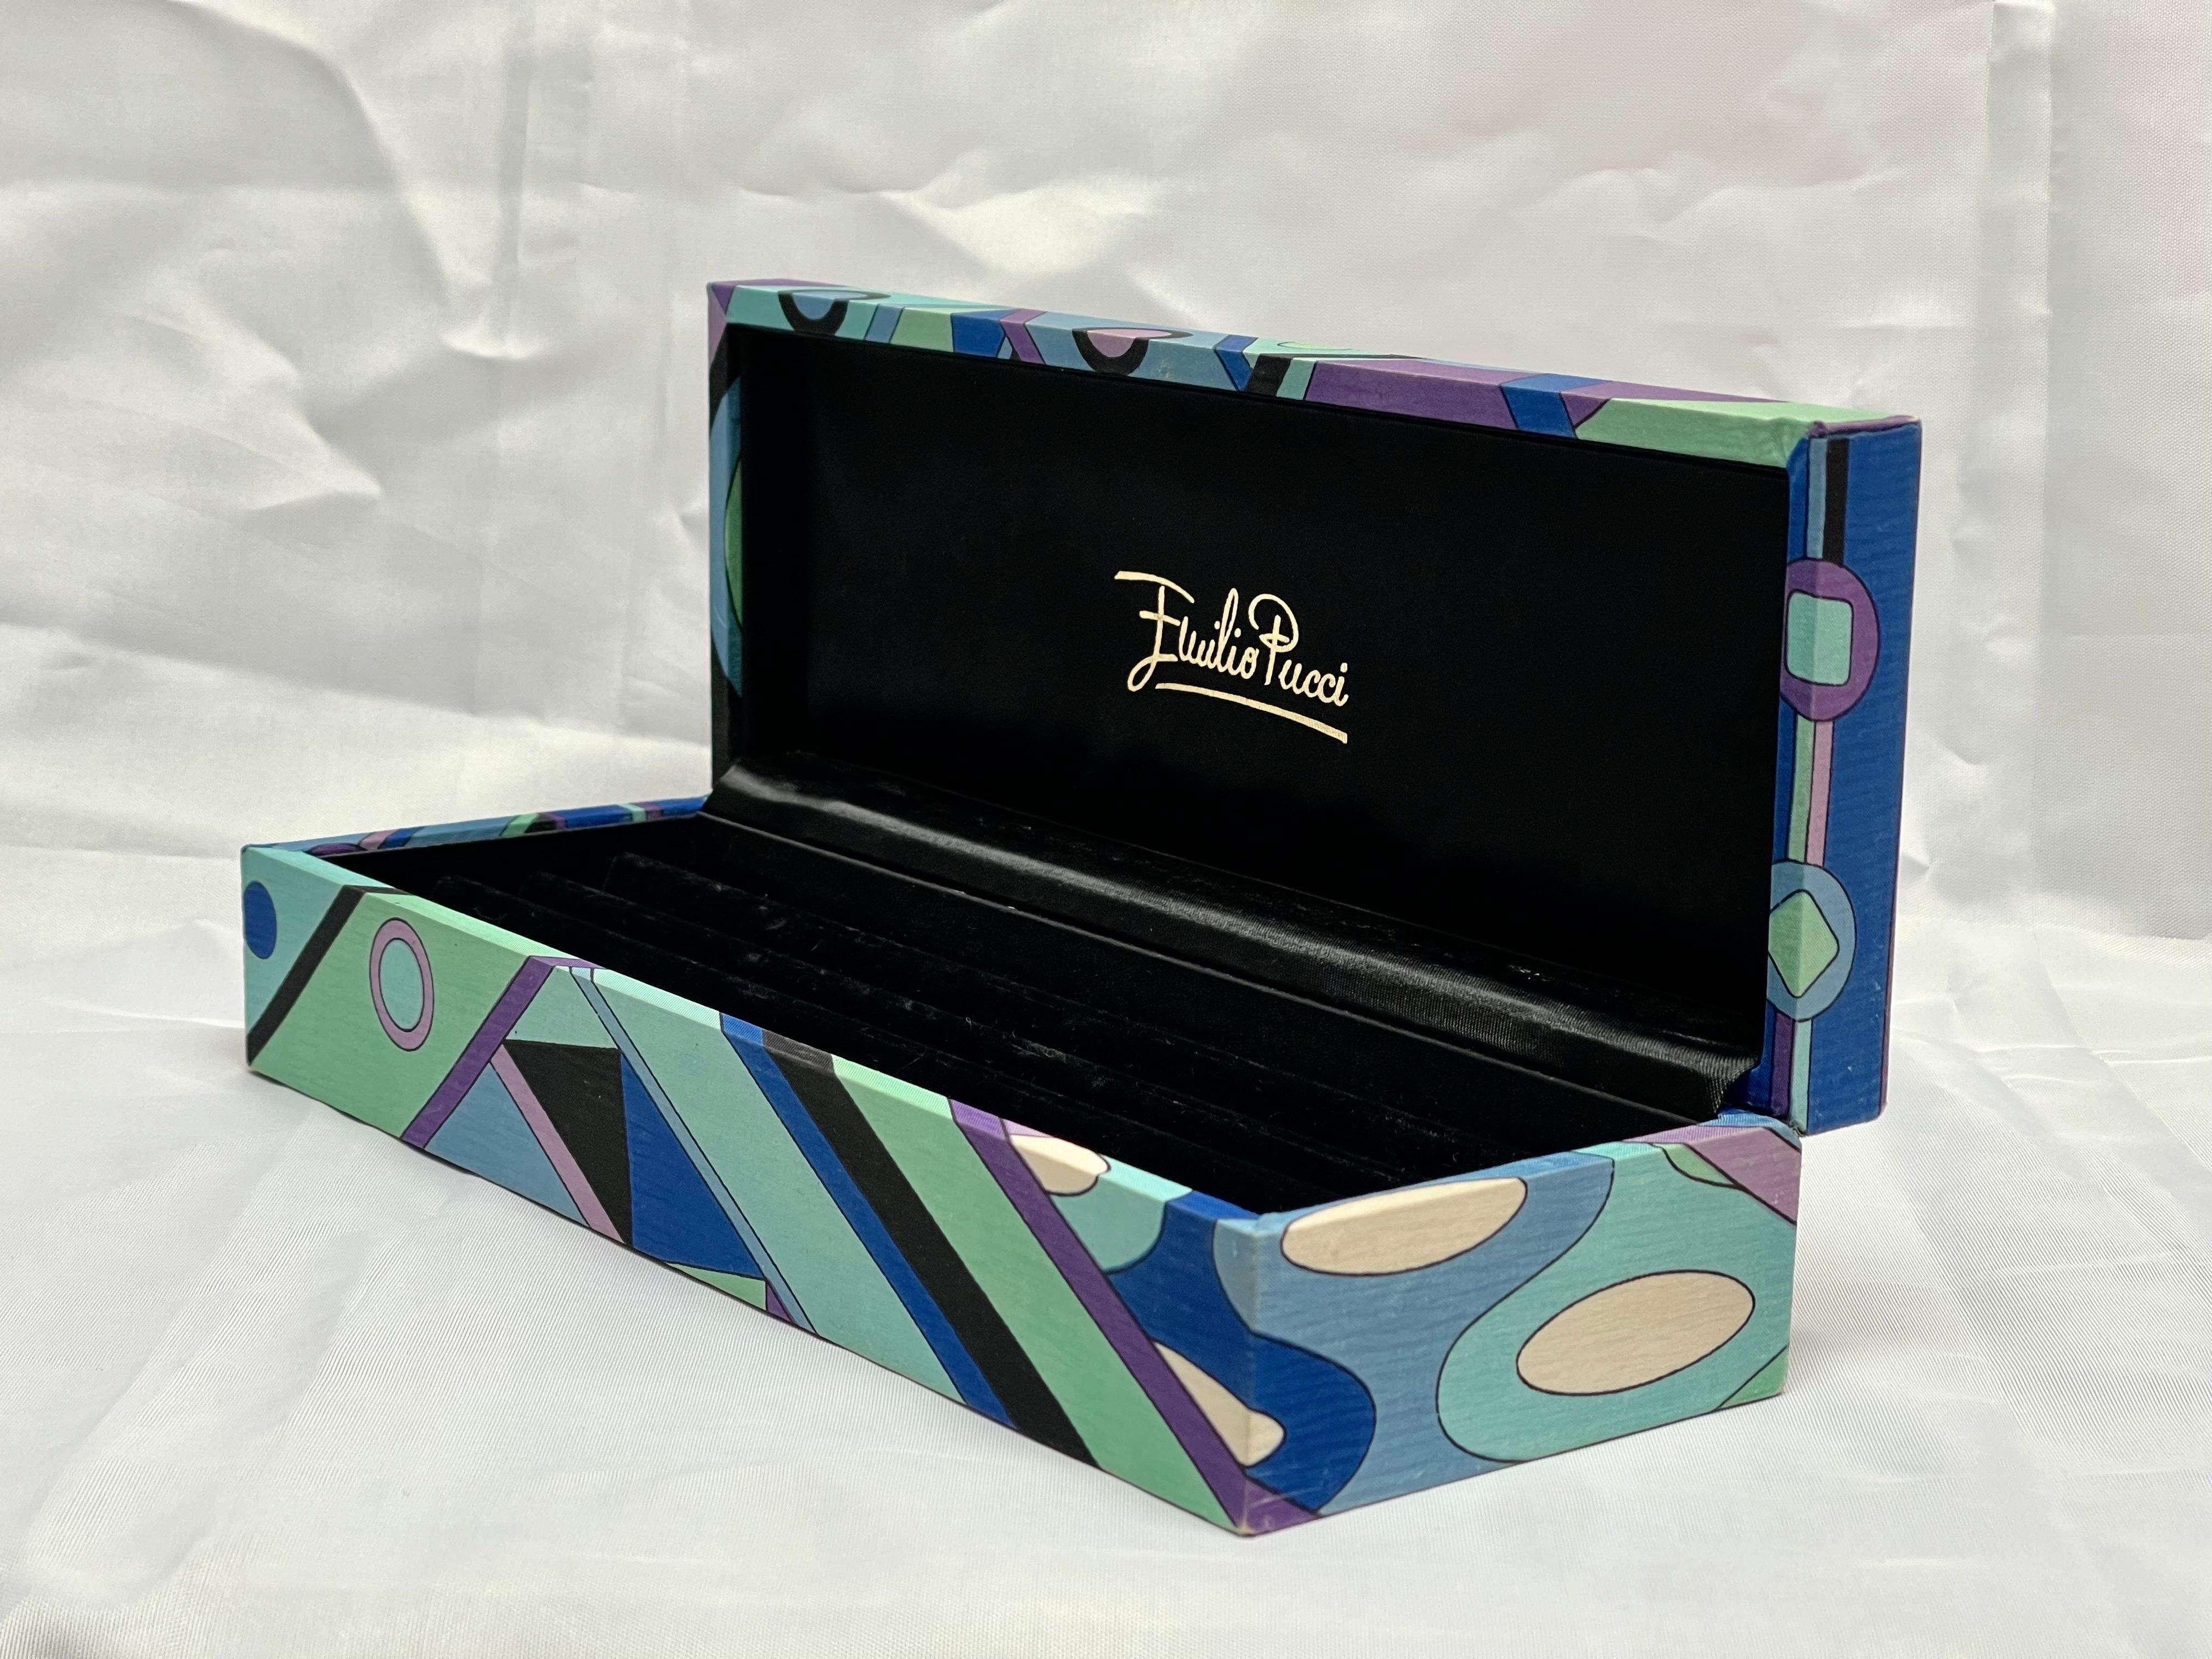 Rare Signed Jewelry Box by Emilio Pucci For Sale 2